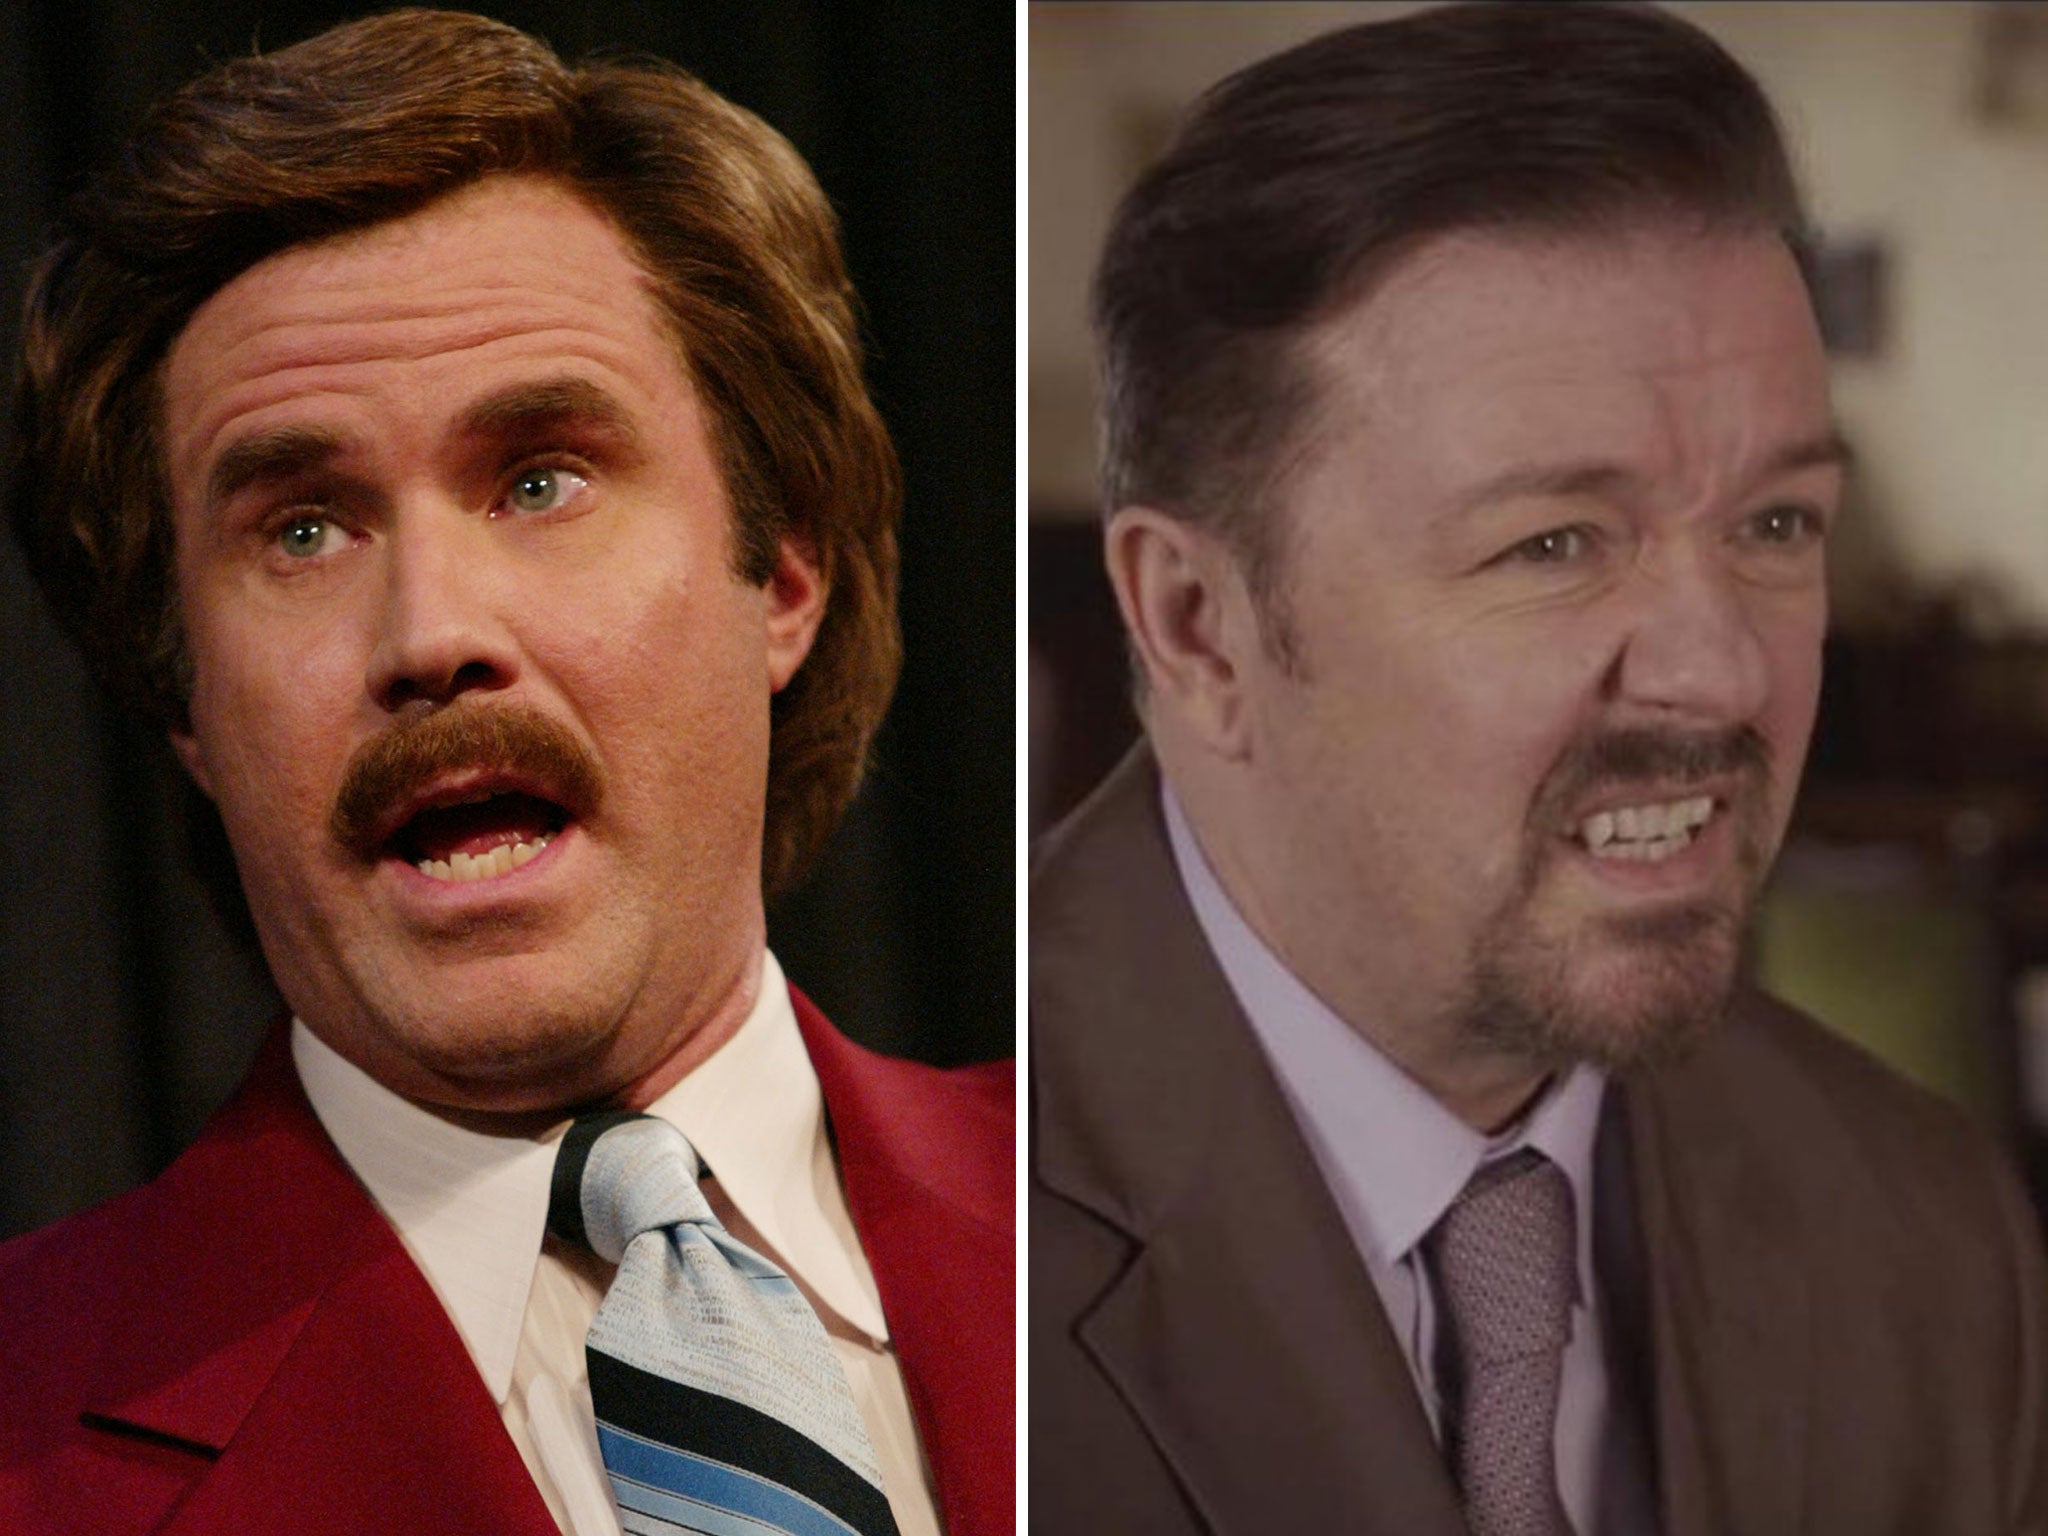 Will Ferrell will return as Ron Burgundy (left) and Ricky Gervais as David Brent (right) for tonight's Comic Relief